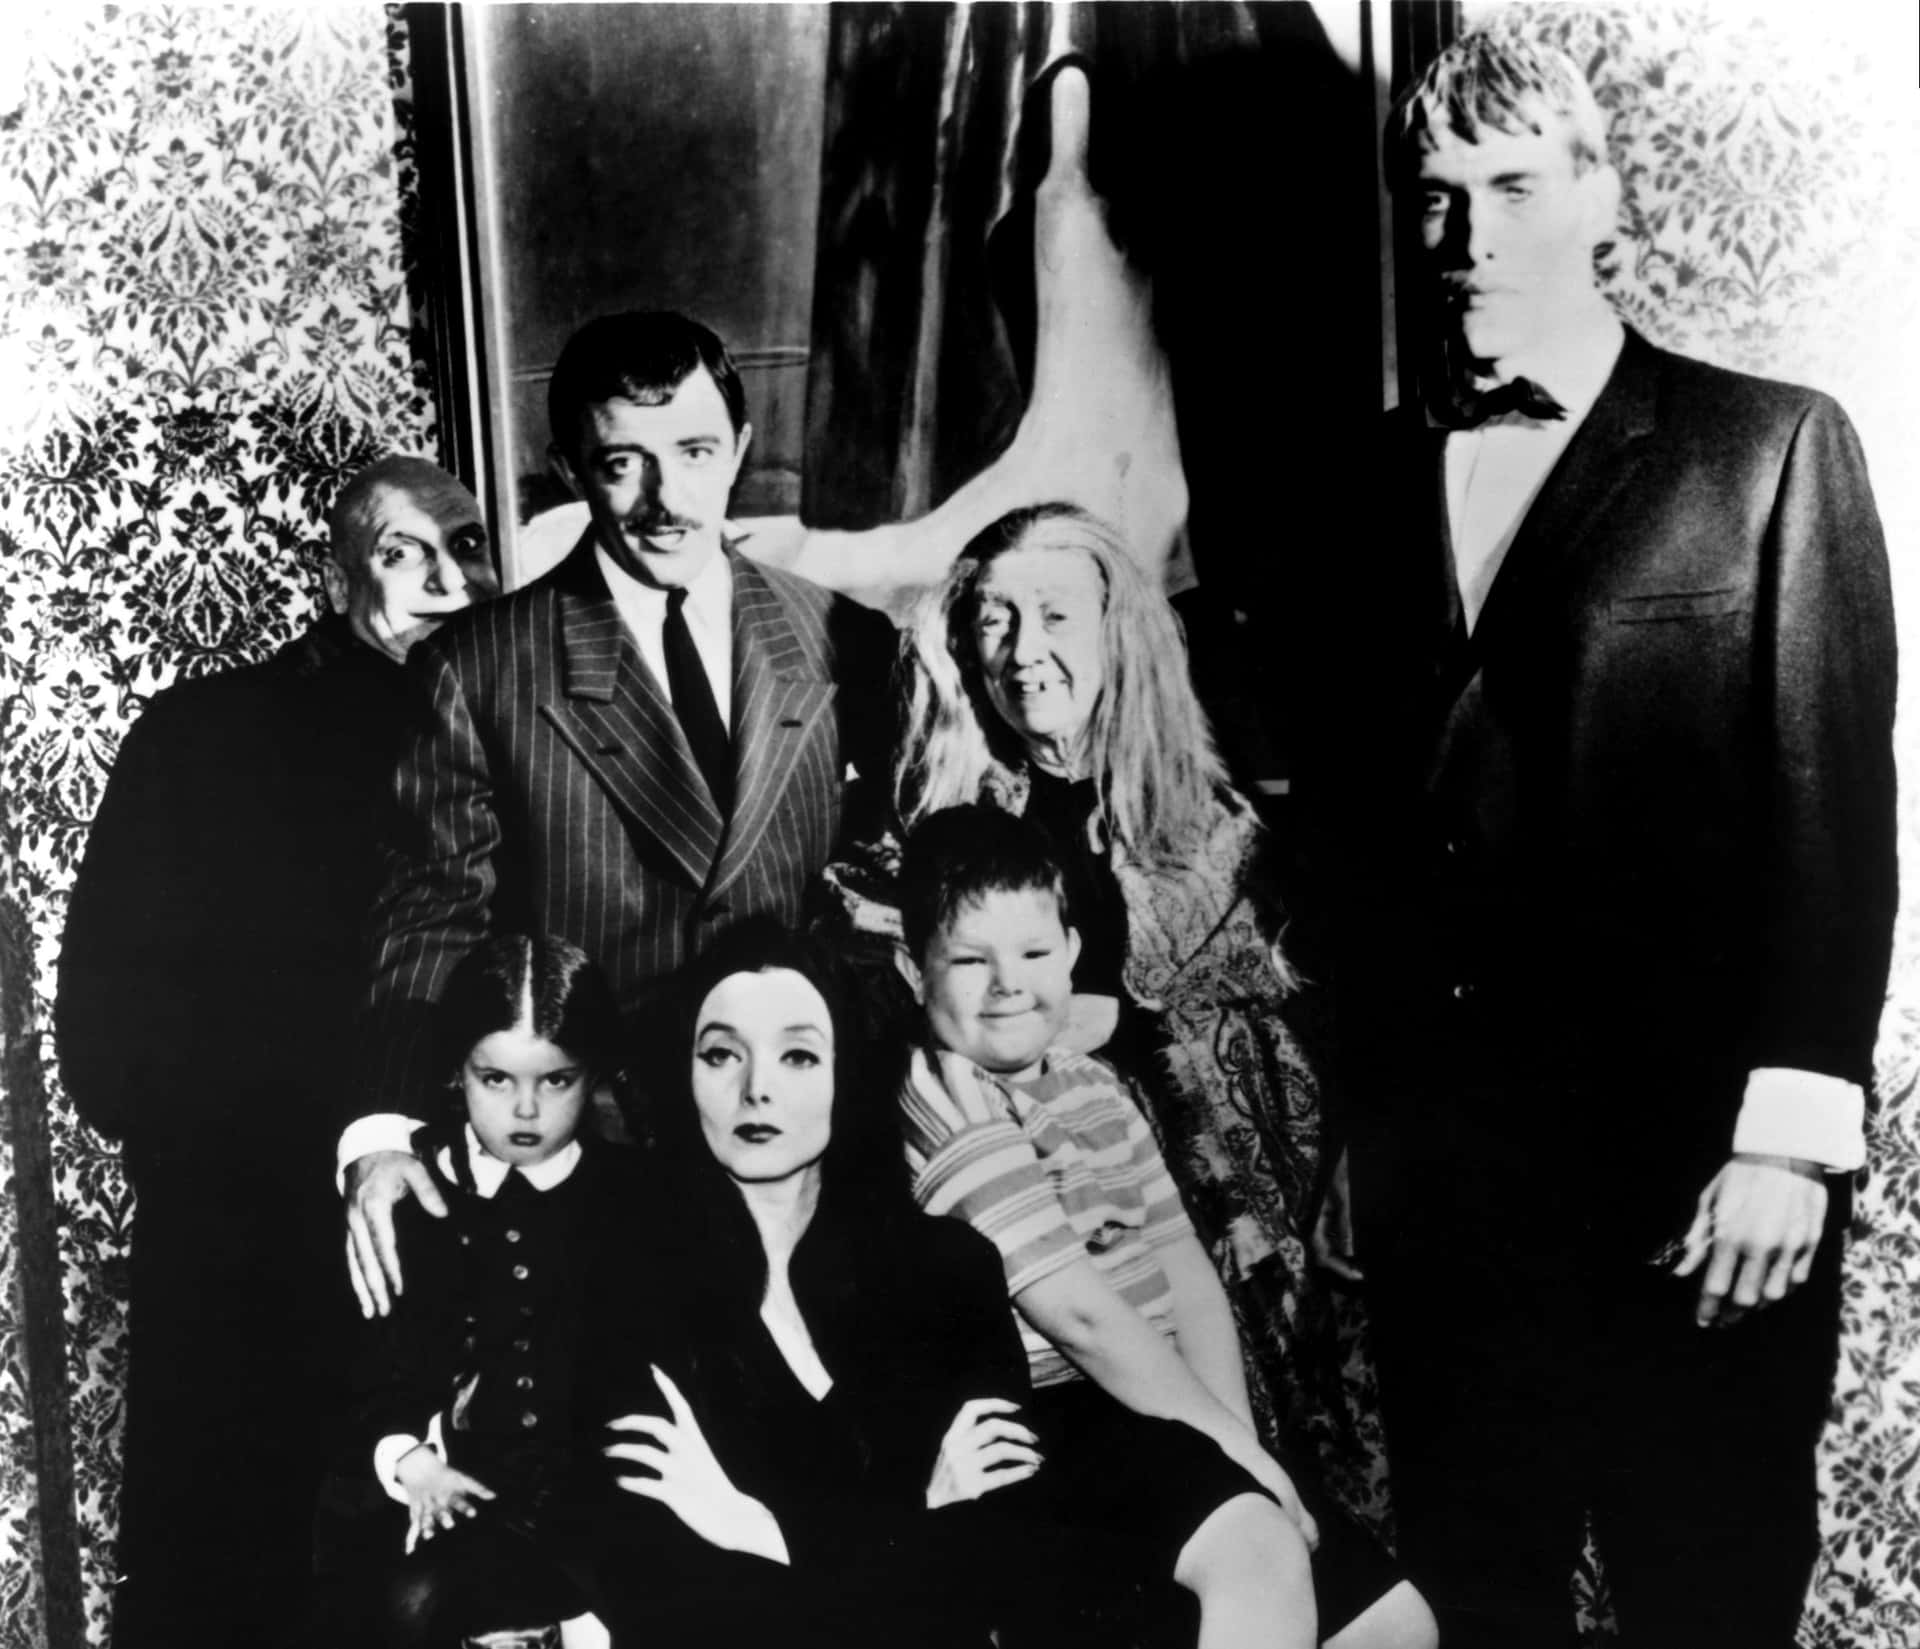 The Addams Family Together Again